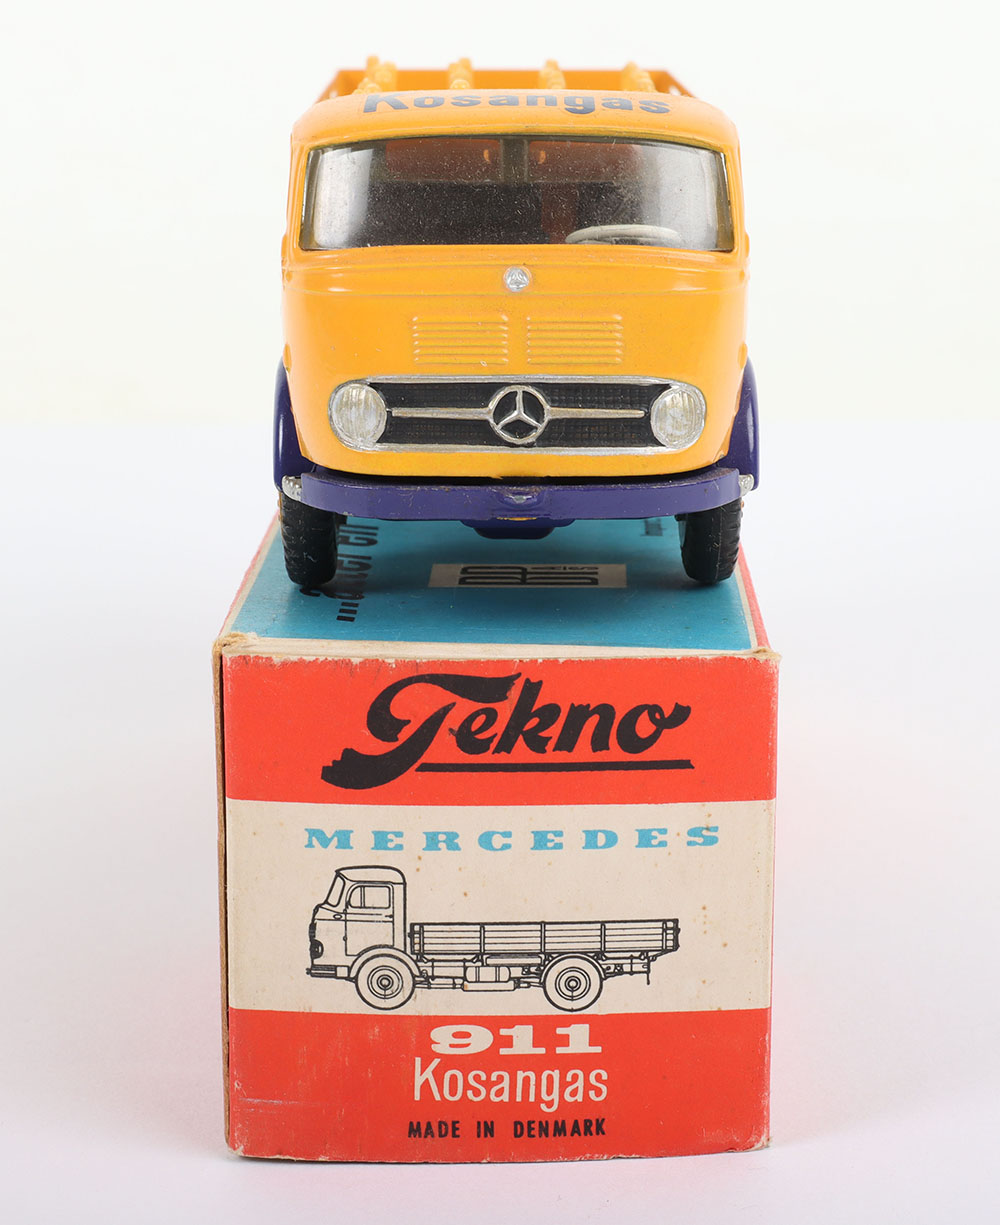 Scarce Tekno 911 Mercedes Benz LP322 Kosangas Delivery Truck - Image 5 of 6